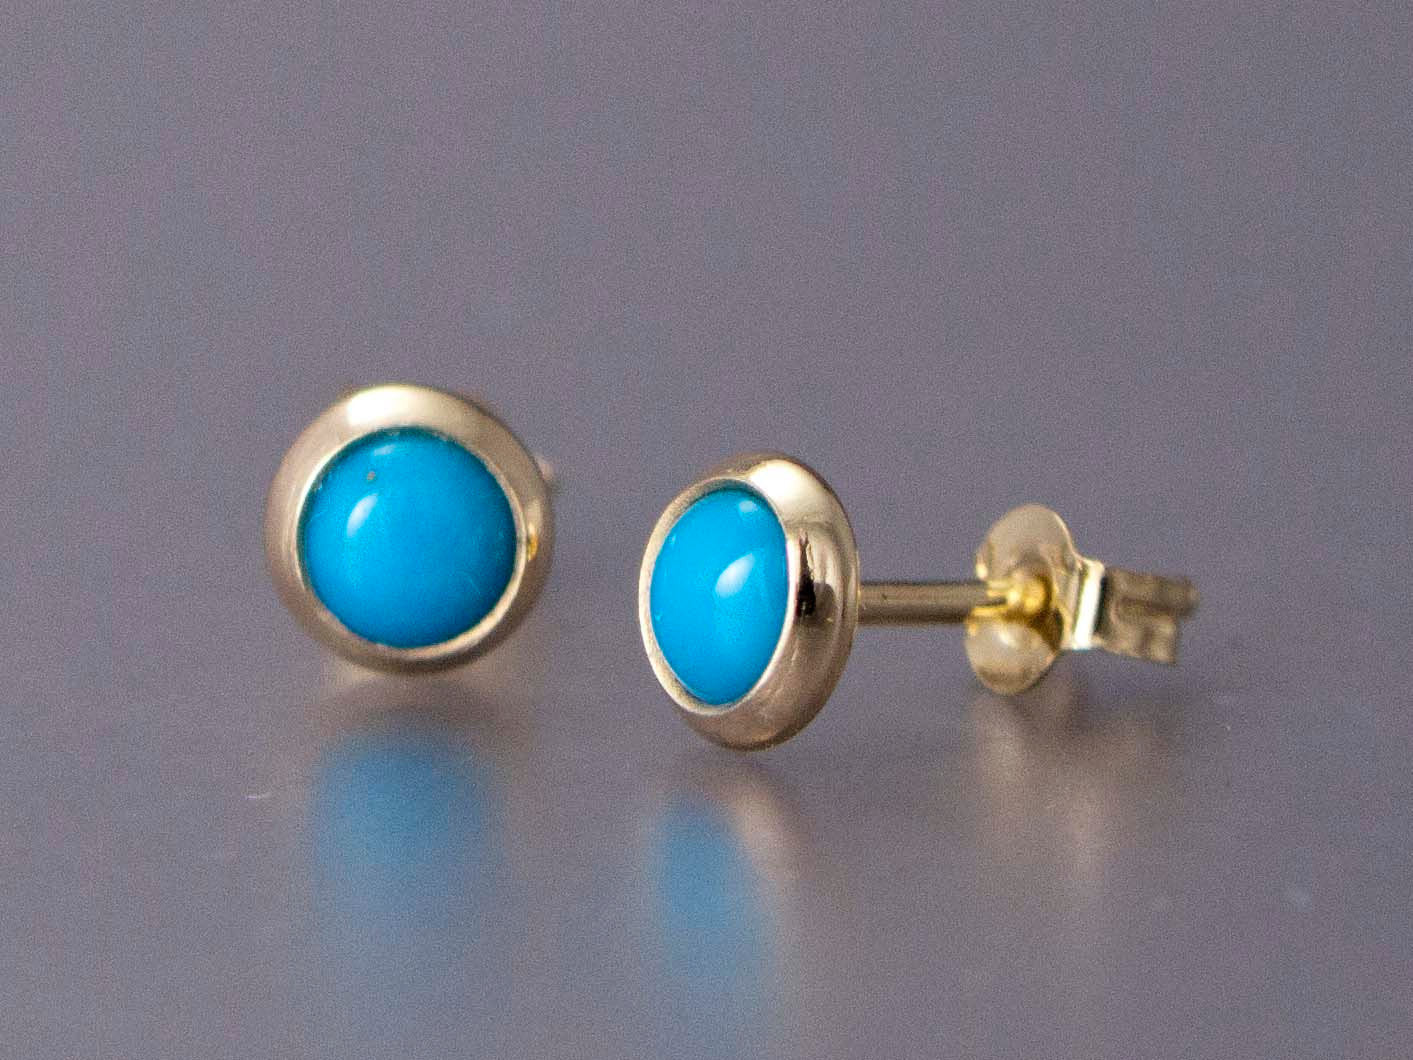 Small Turquoise 14k Gold Studs - 4mm round cabochon bezel earrings